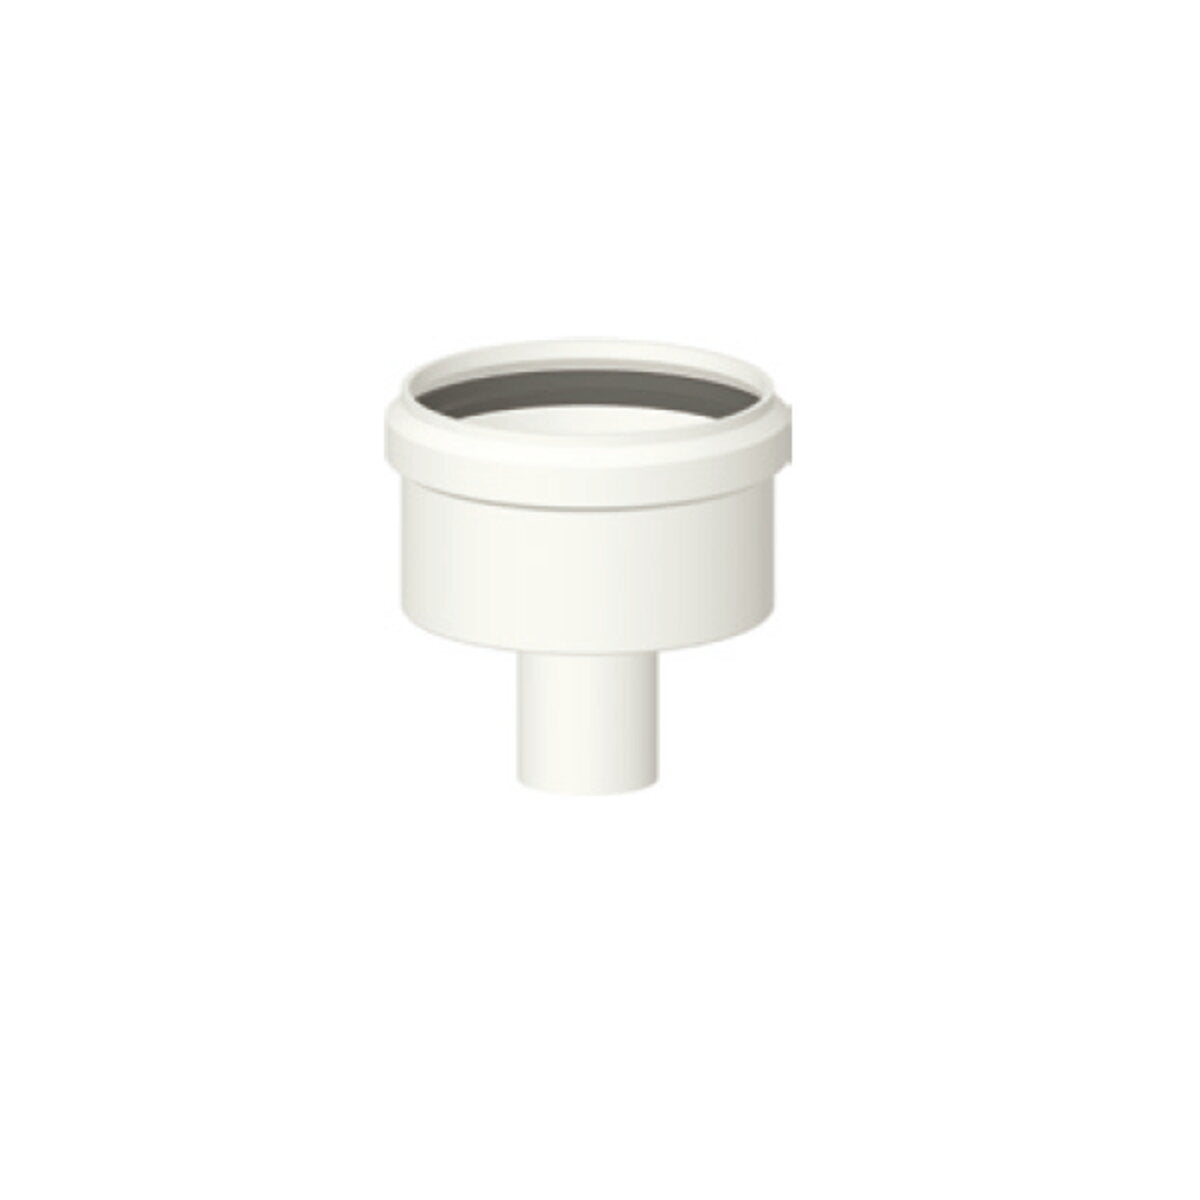 Condensate drain plug for condensing boiler fume outlet diam. 125mm. in pp